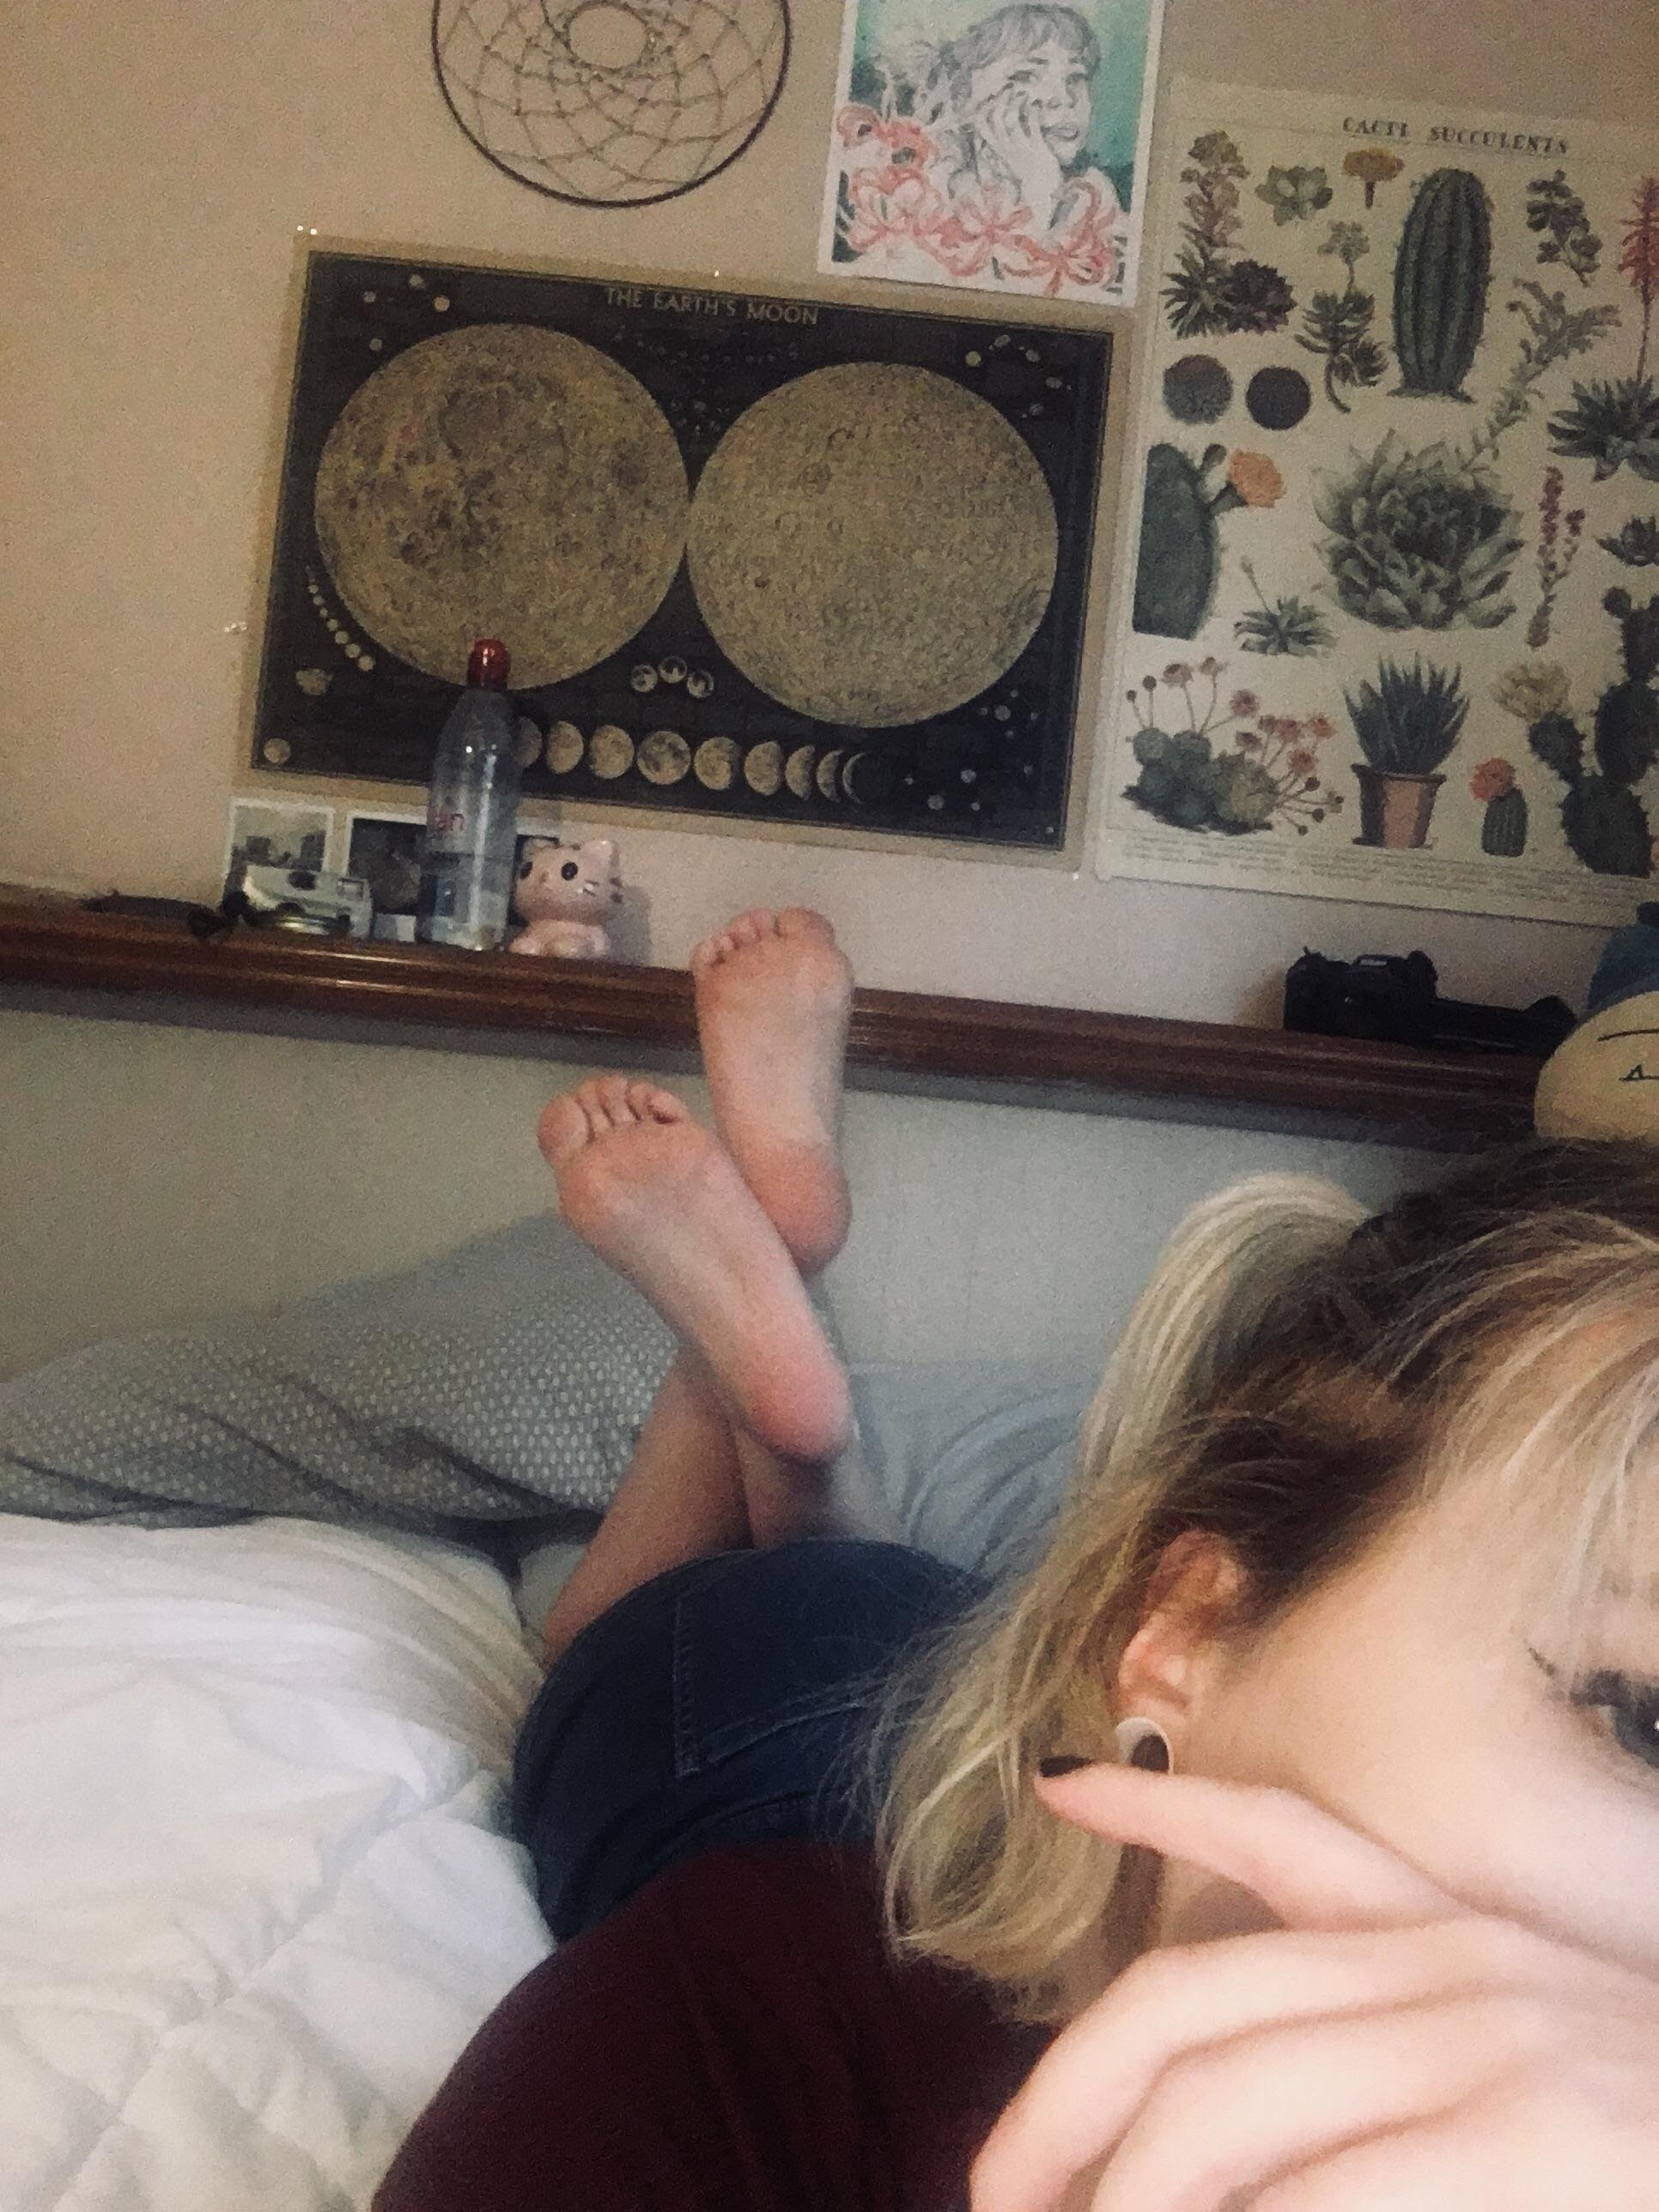 I’ve never known if I have nice feet, what do you think of them?